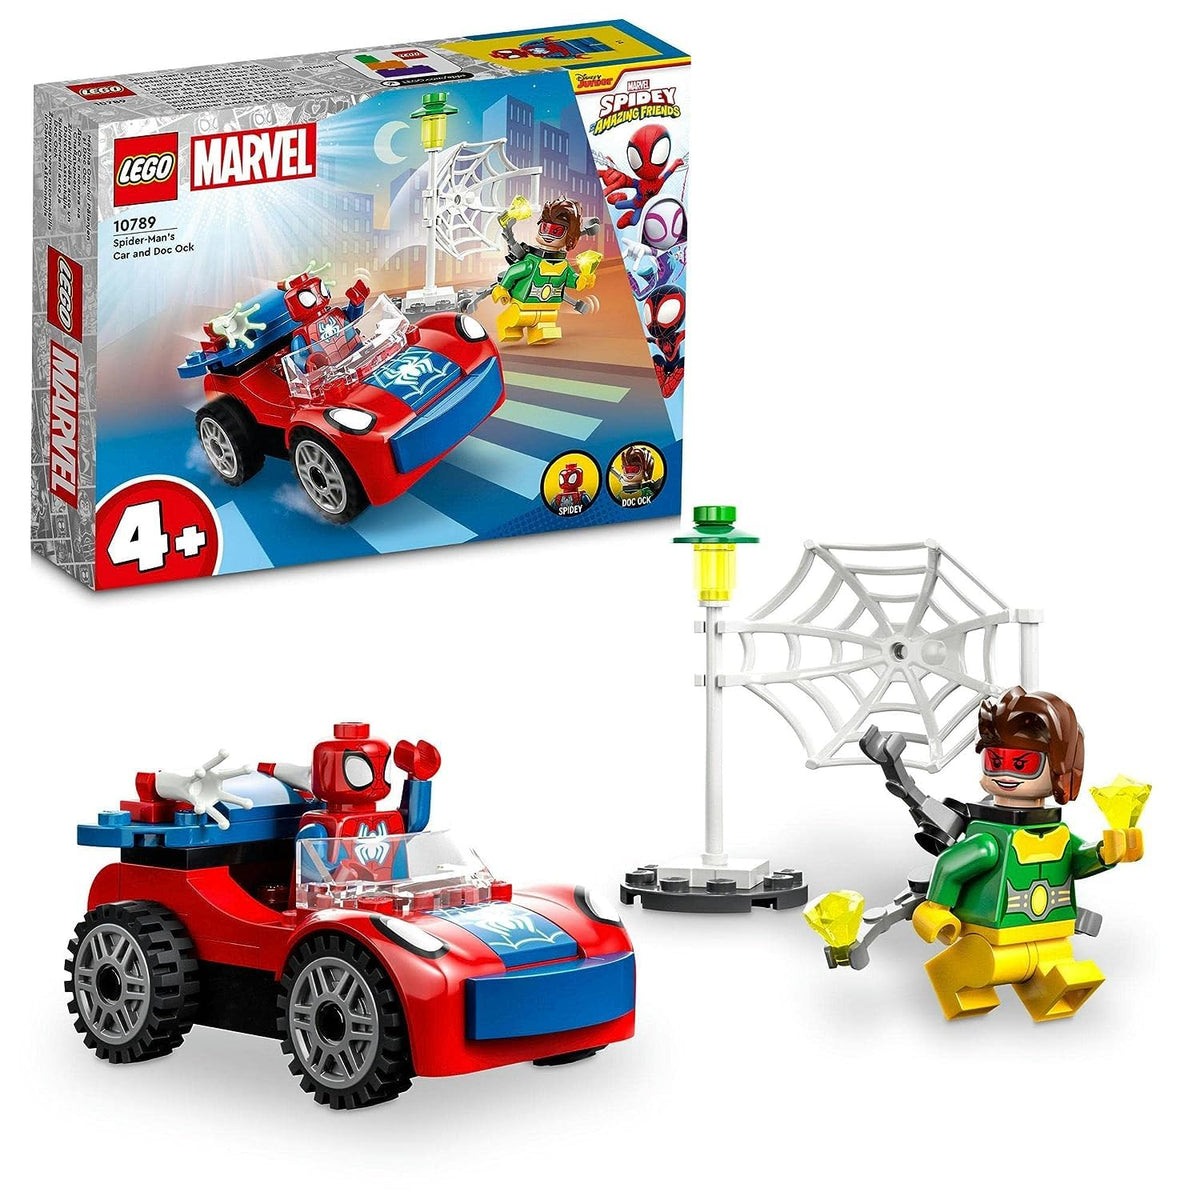 LEGO Marvel Spider-Man's Car and Doc Ock Building Kit for Ages 4+